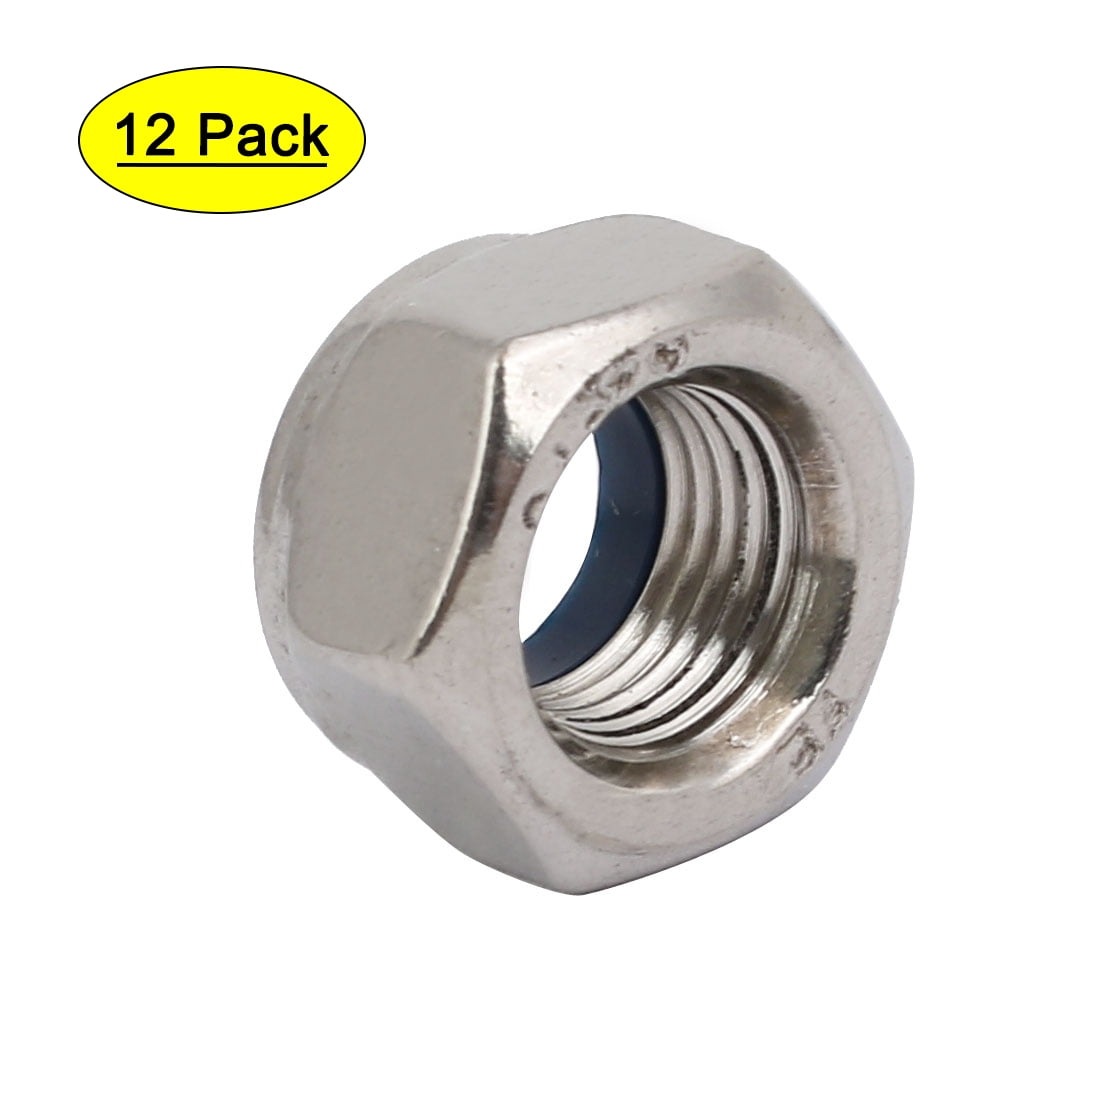 Stainless Steel Nylock Hex Nut M5-.8 With White Insert Inch 25 pcs 